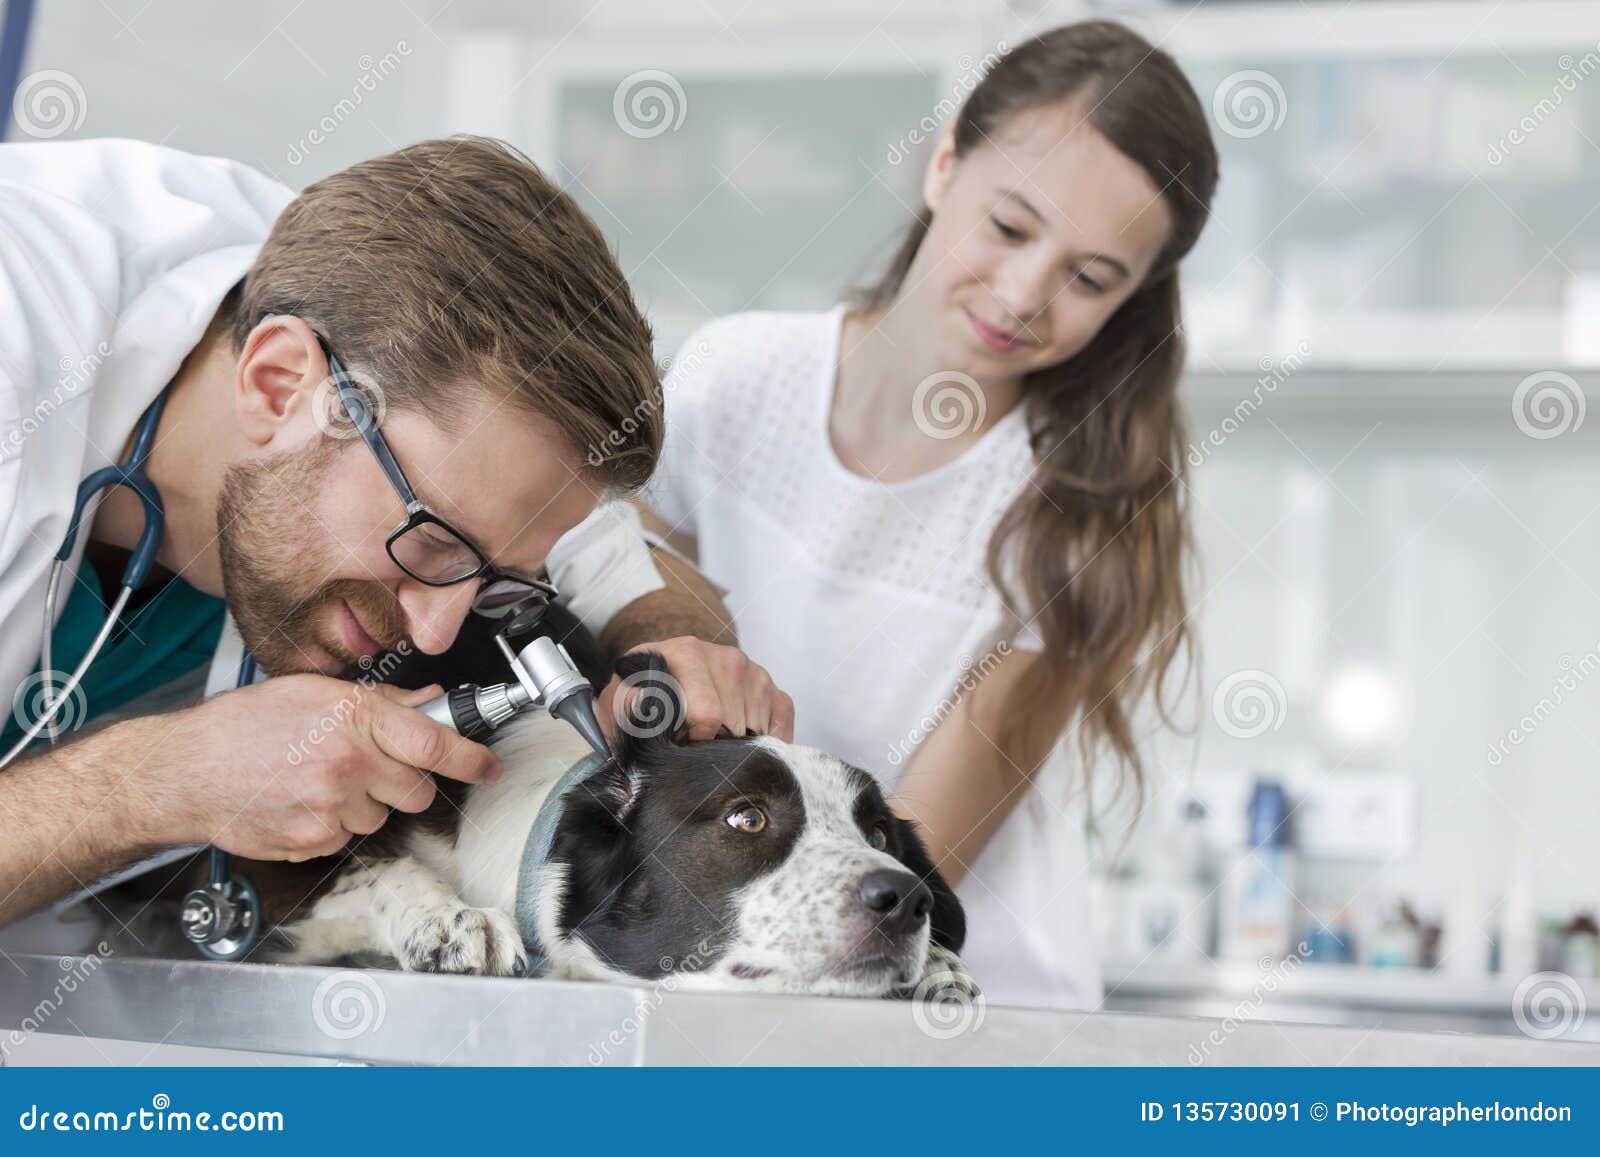 Girl Looking at Veterinary Doctor Examining Dog S Ear through Otoscope  Equipment in Clinic Stock Image - Image of clinic, caucasian: 135730091